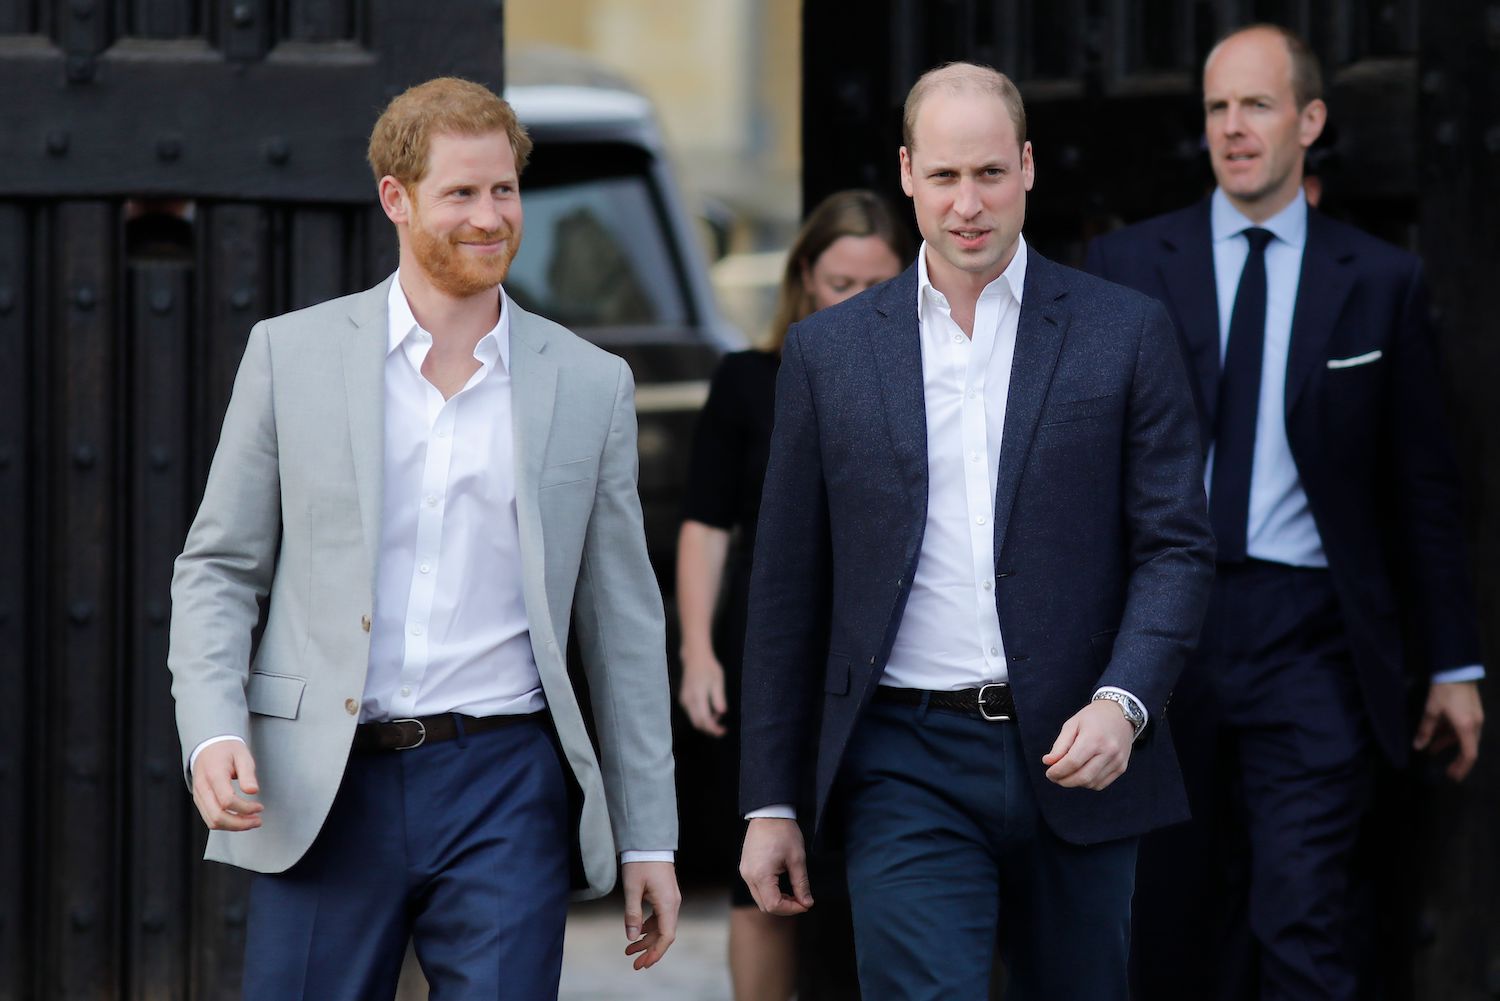 Prince Harry and Prince William arrive to greet well-wishers on the street outside Windsor Castle in Windsor on May 18, 2018, the eve of Prince Harry's royal wedding to Meghan Markle